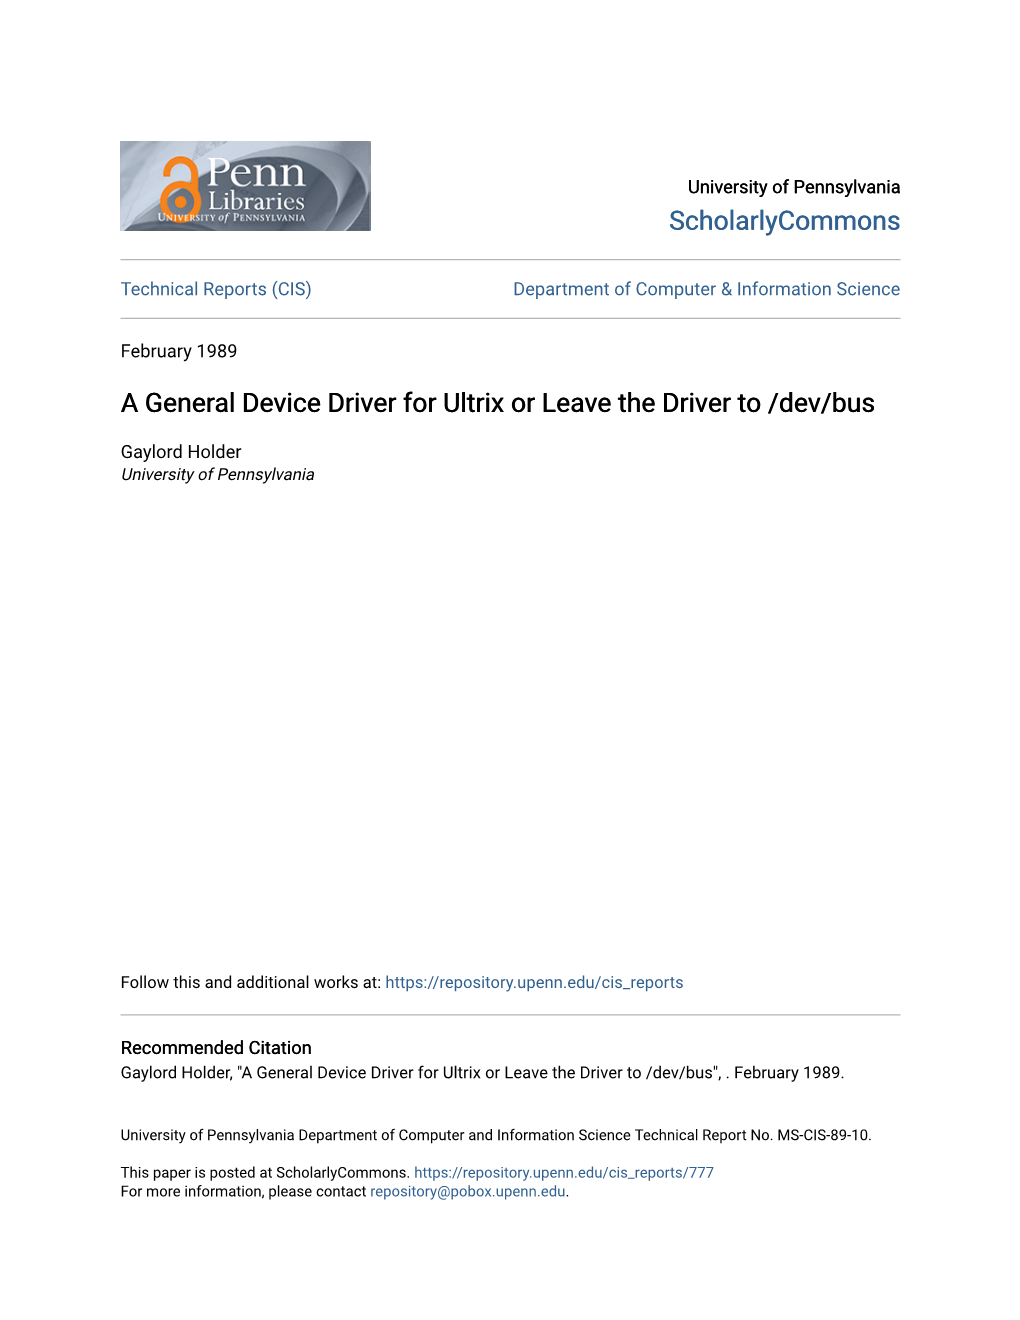 A General Device Driver for Ultrix Or Leave the Driver to /Dev/Bus